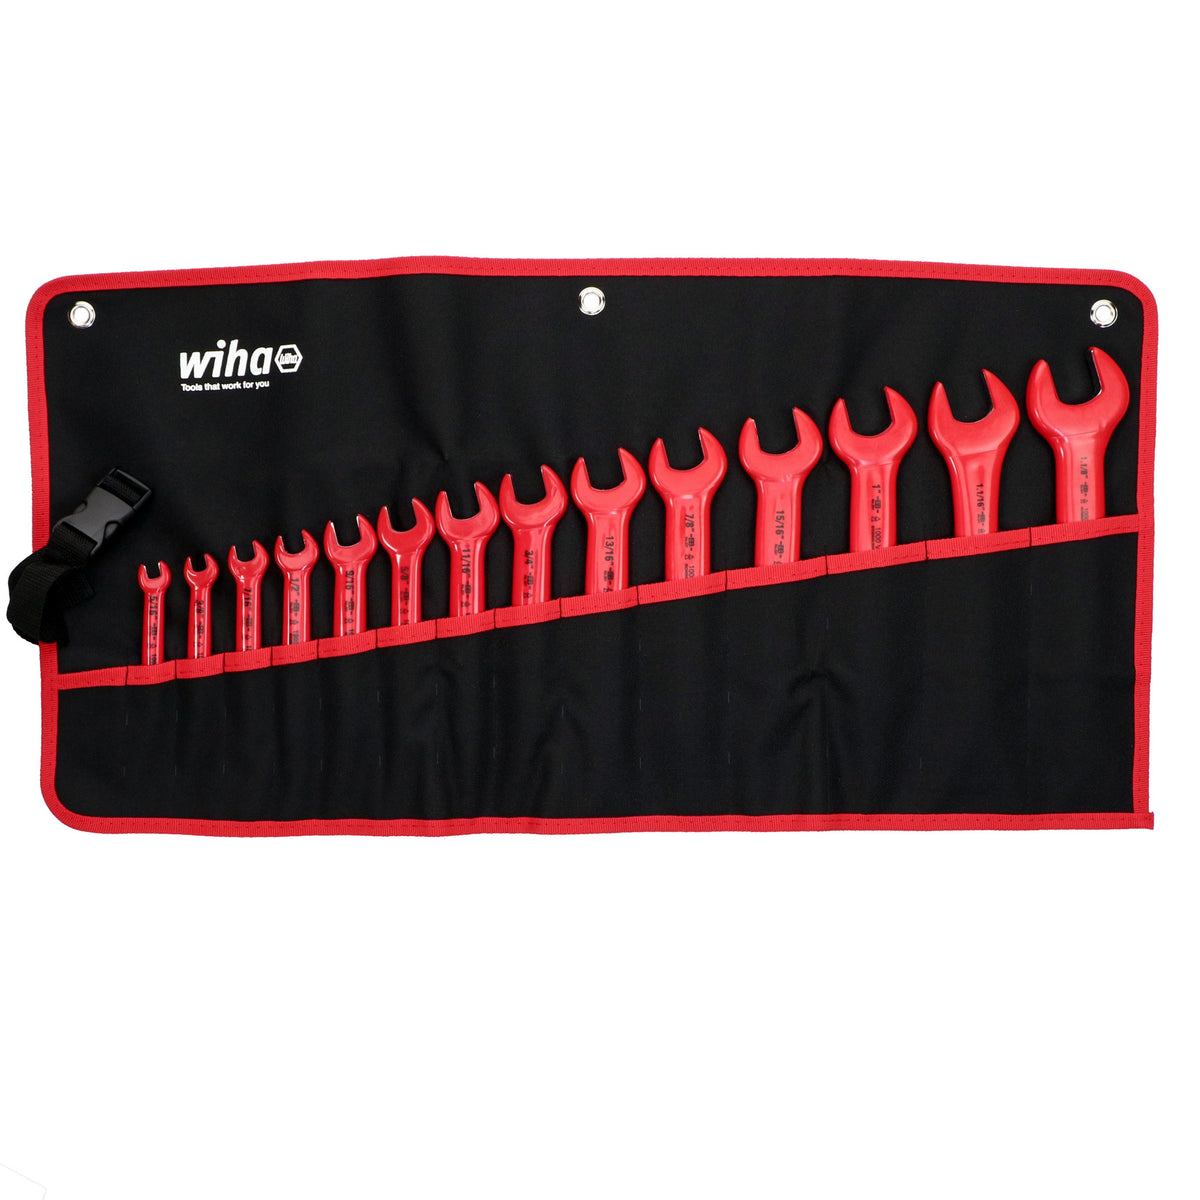 Wiha 20190 Insulated Open End Inch Wrench Set Made in Germany